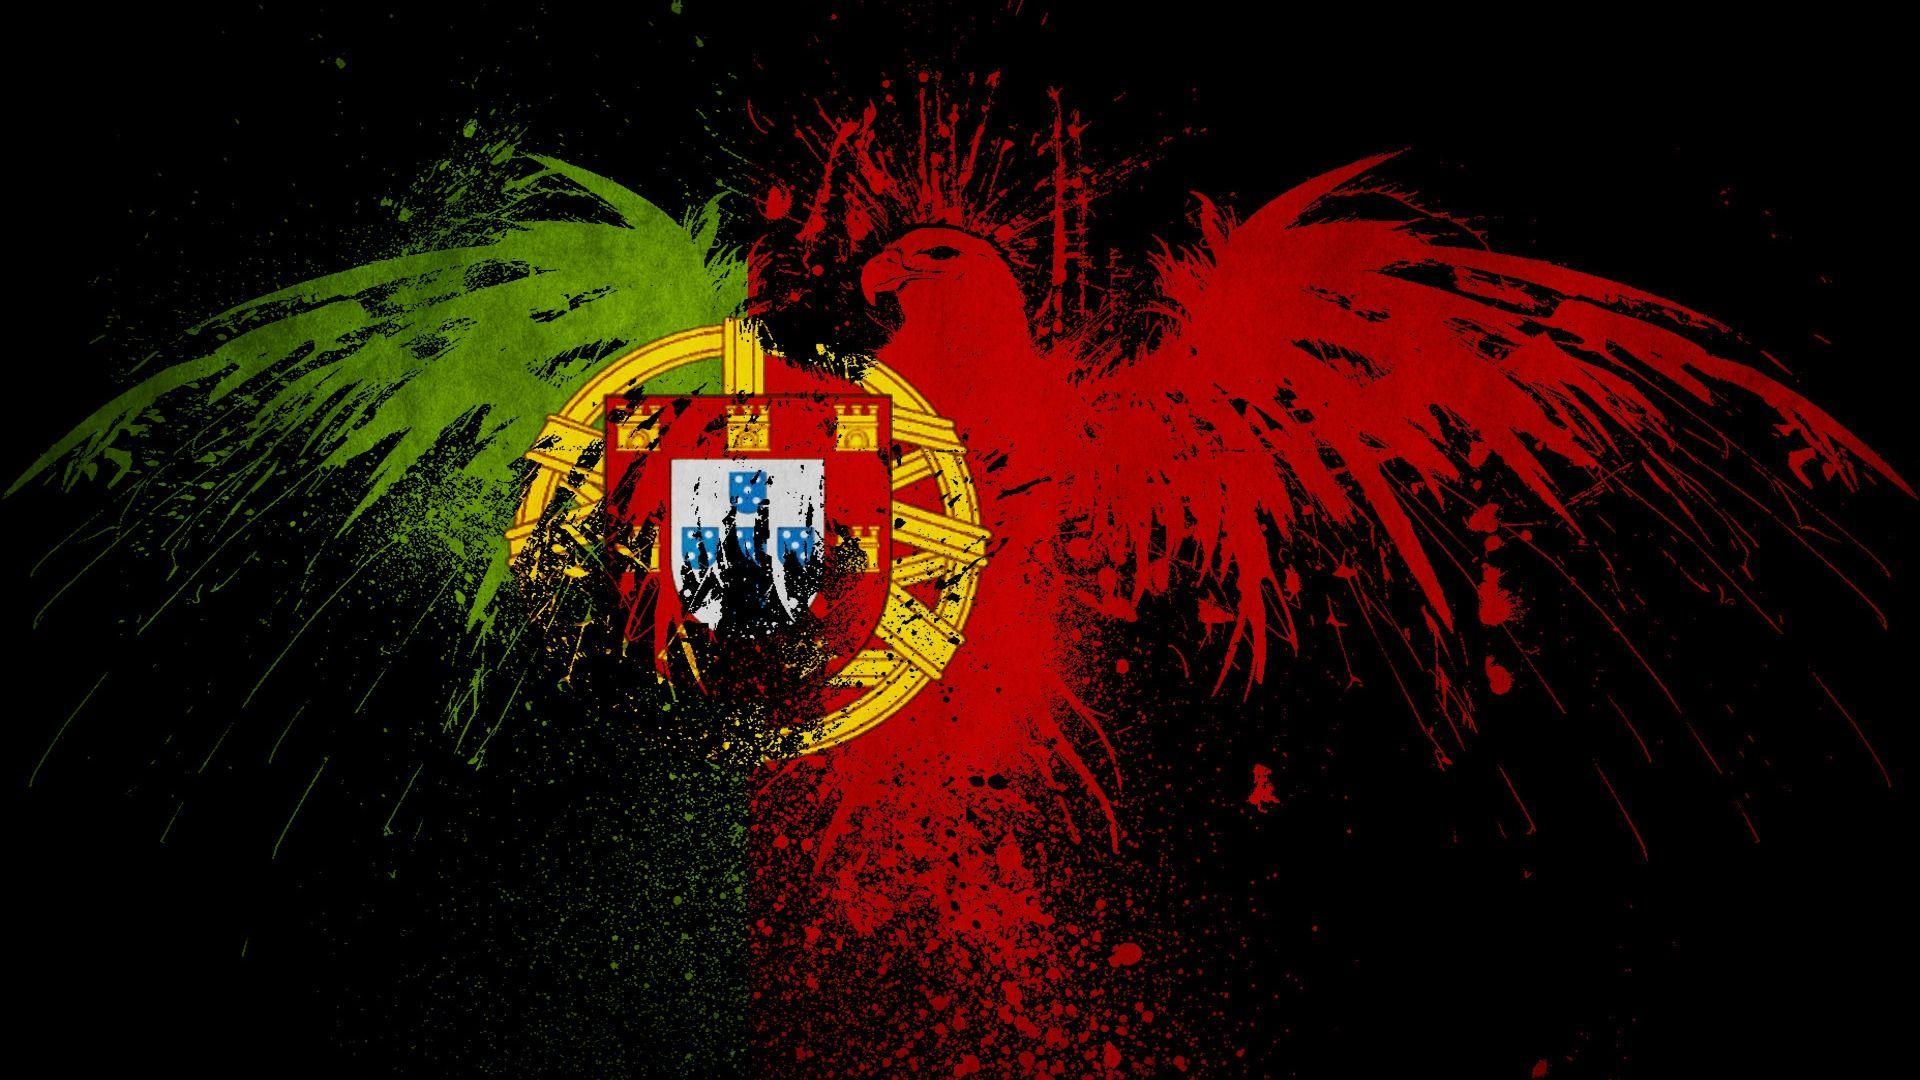 Abstract Portugal Flag World Cup 2014 Wallpaper HD Image Widescreen